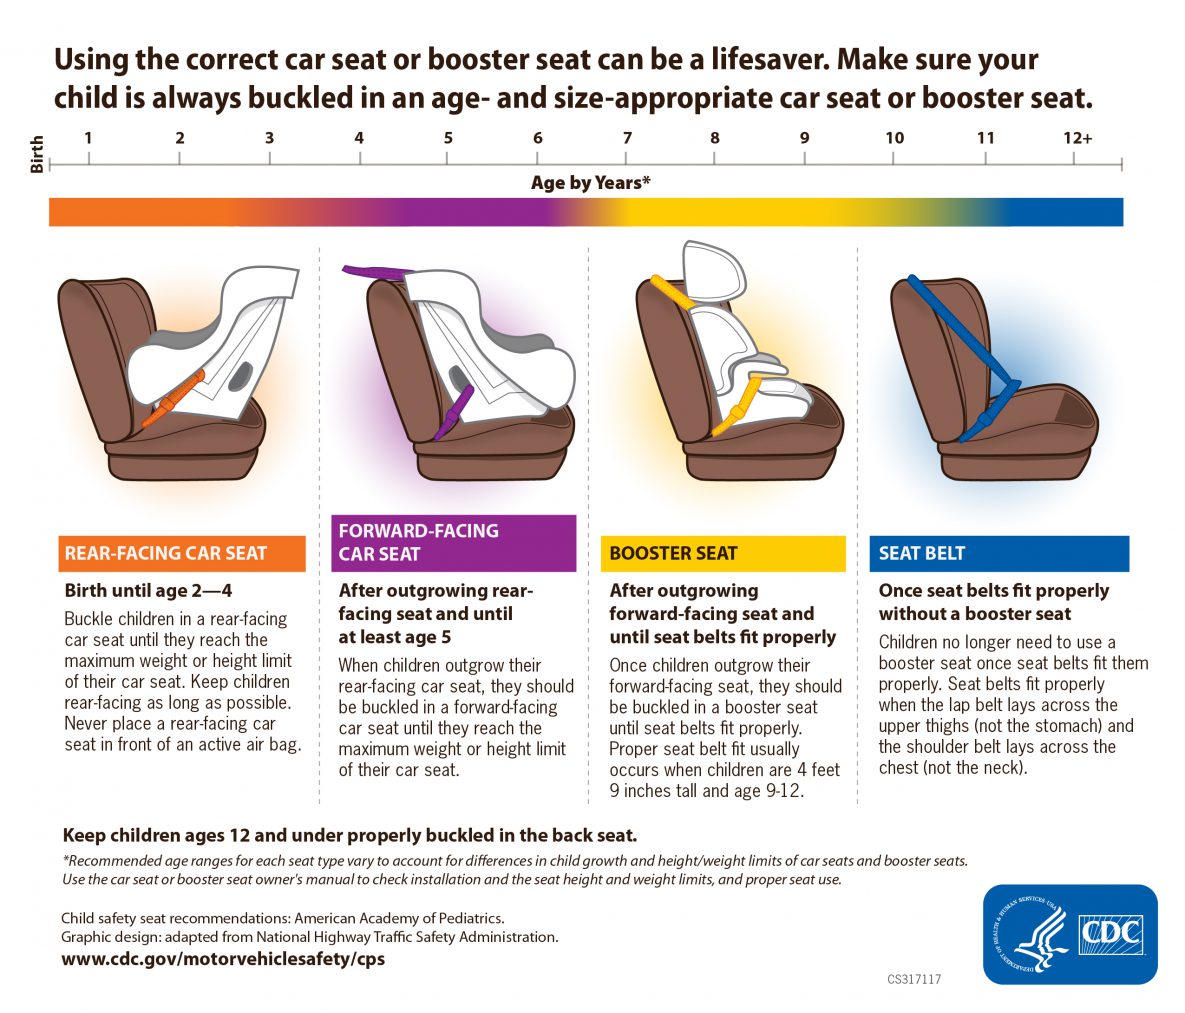 Washington Dc Car Seat Laws Regan, What Are The Legal Requirements For Child Car Seats